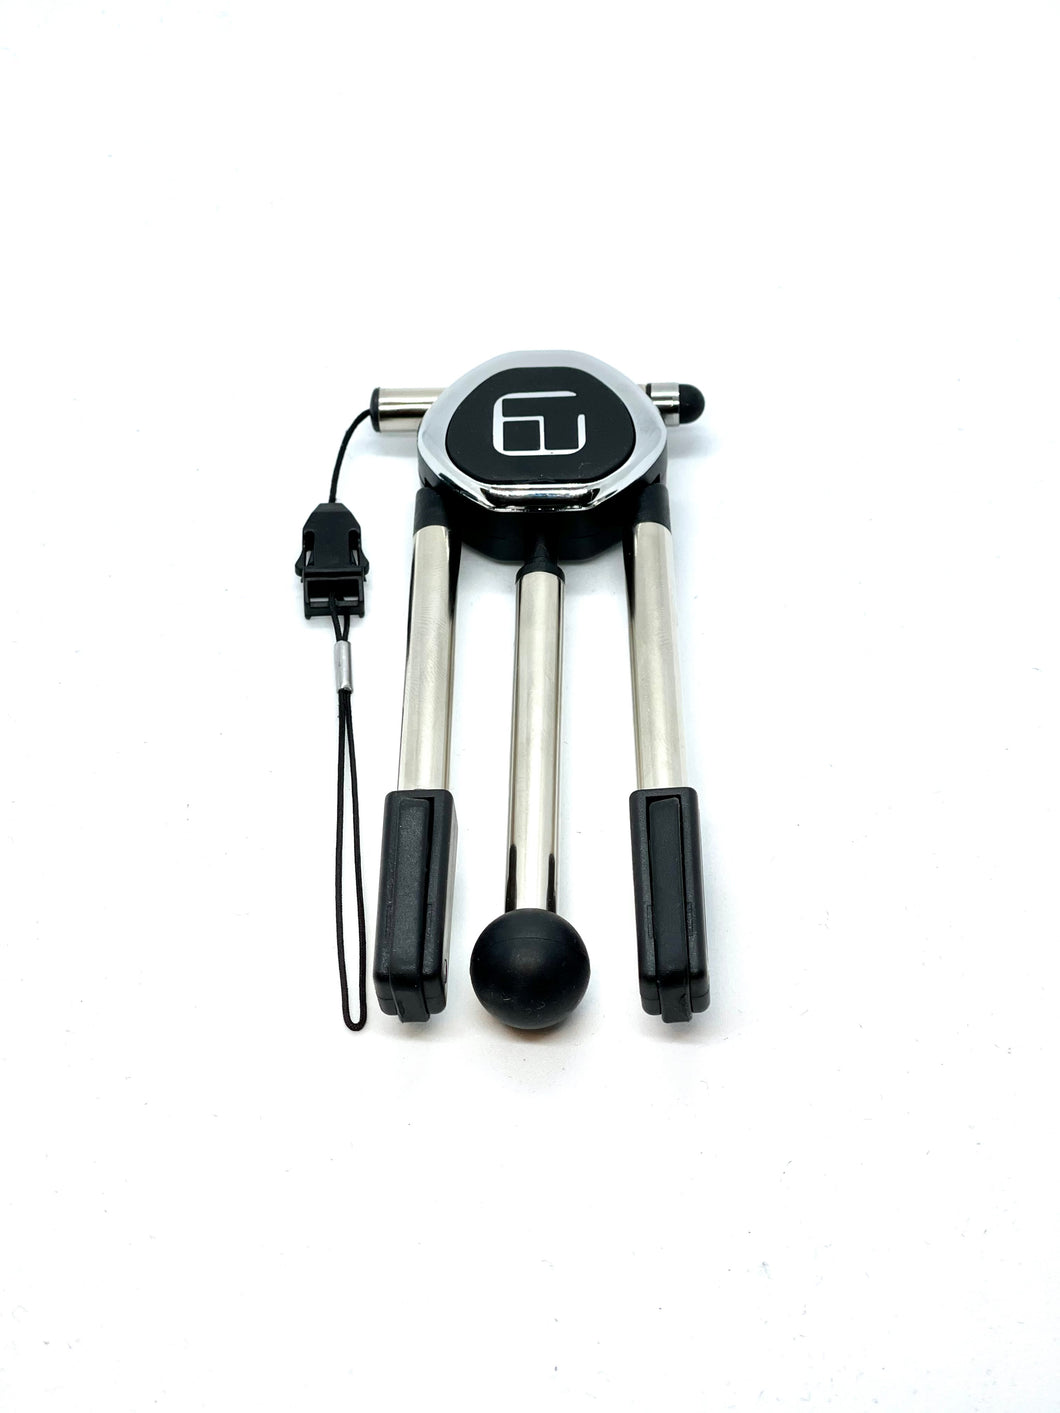 Tripod for Smartphone or Tablet with Touch Pen